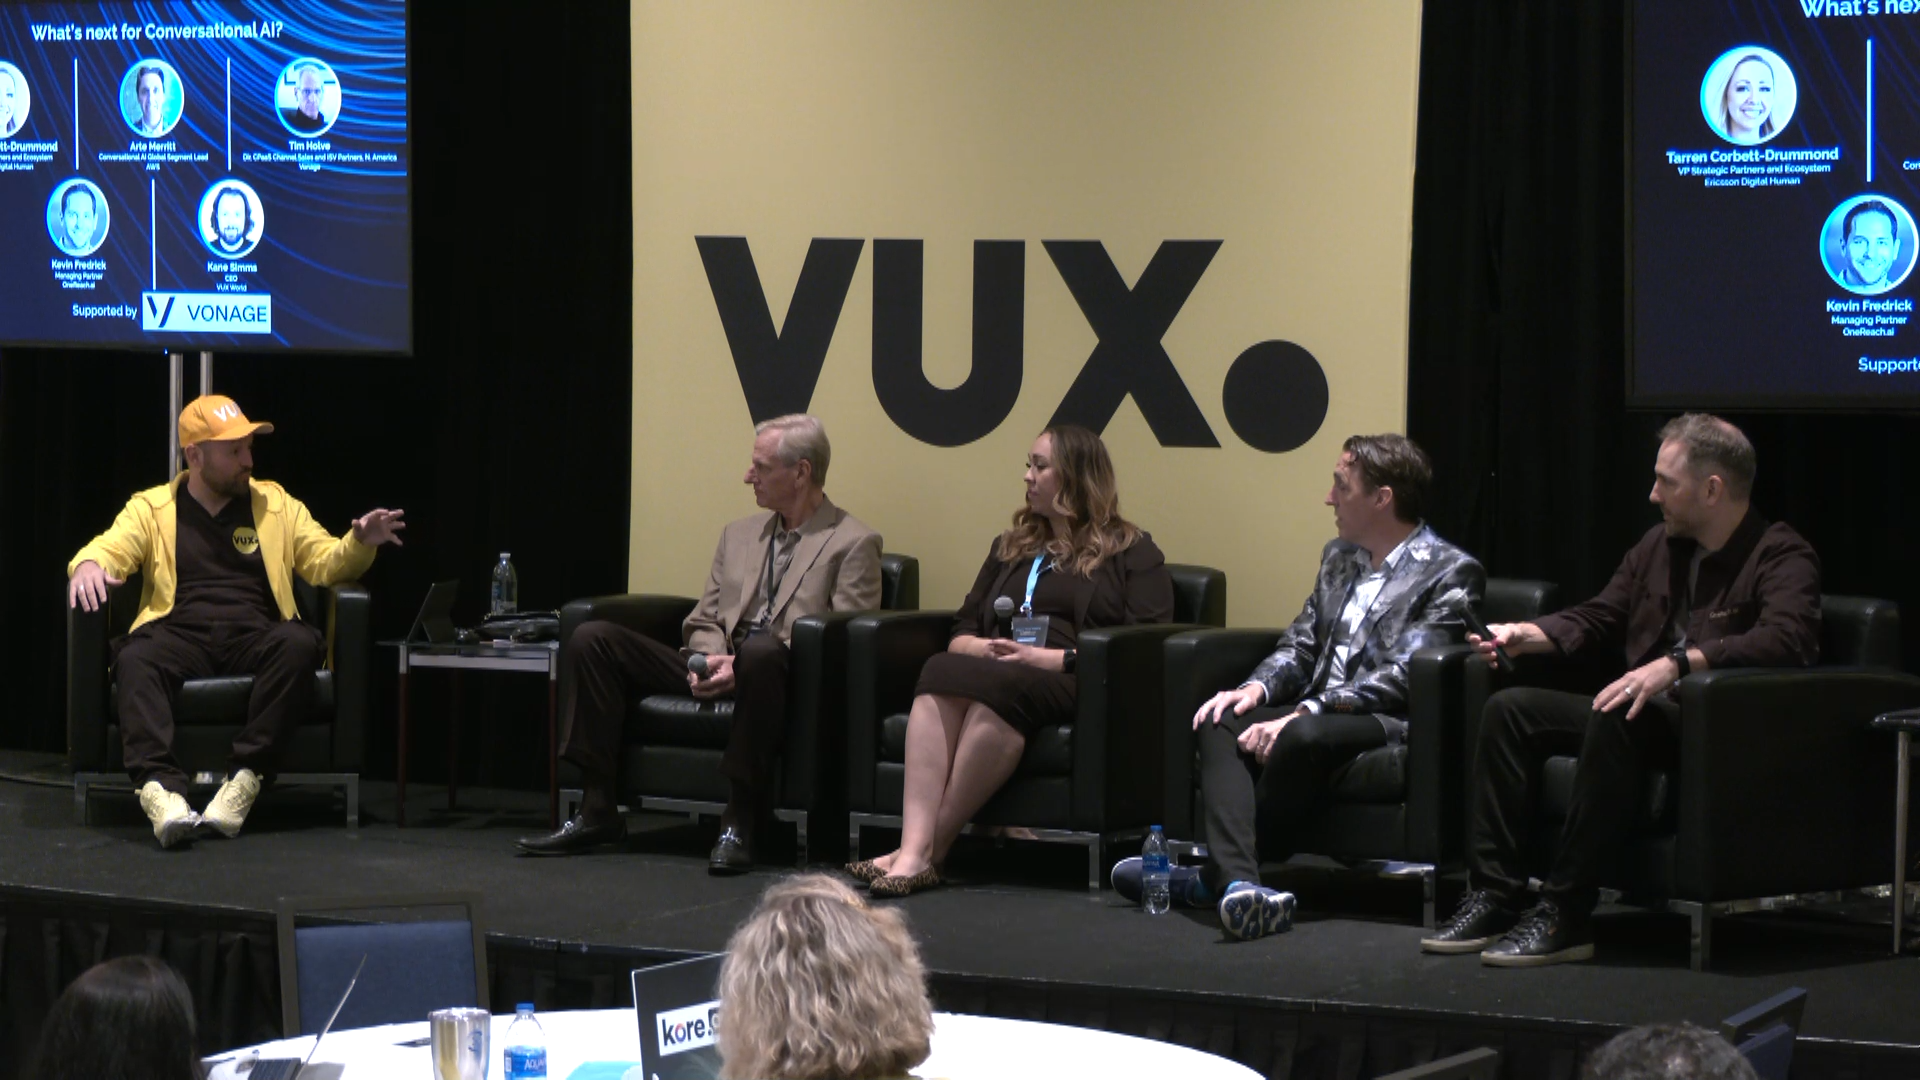 VOICE22 | VUX World: Panel — What’s next for Conversational AI? | Hosted by Kane Simms